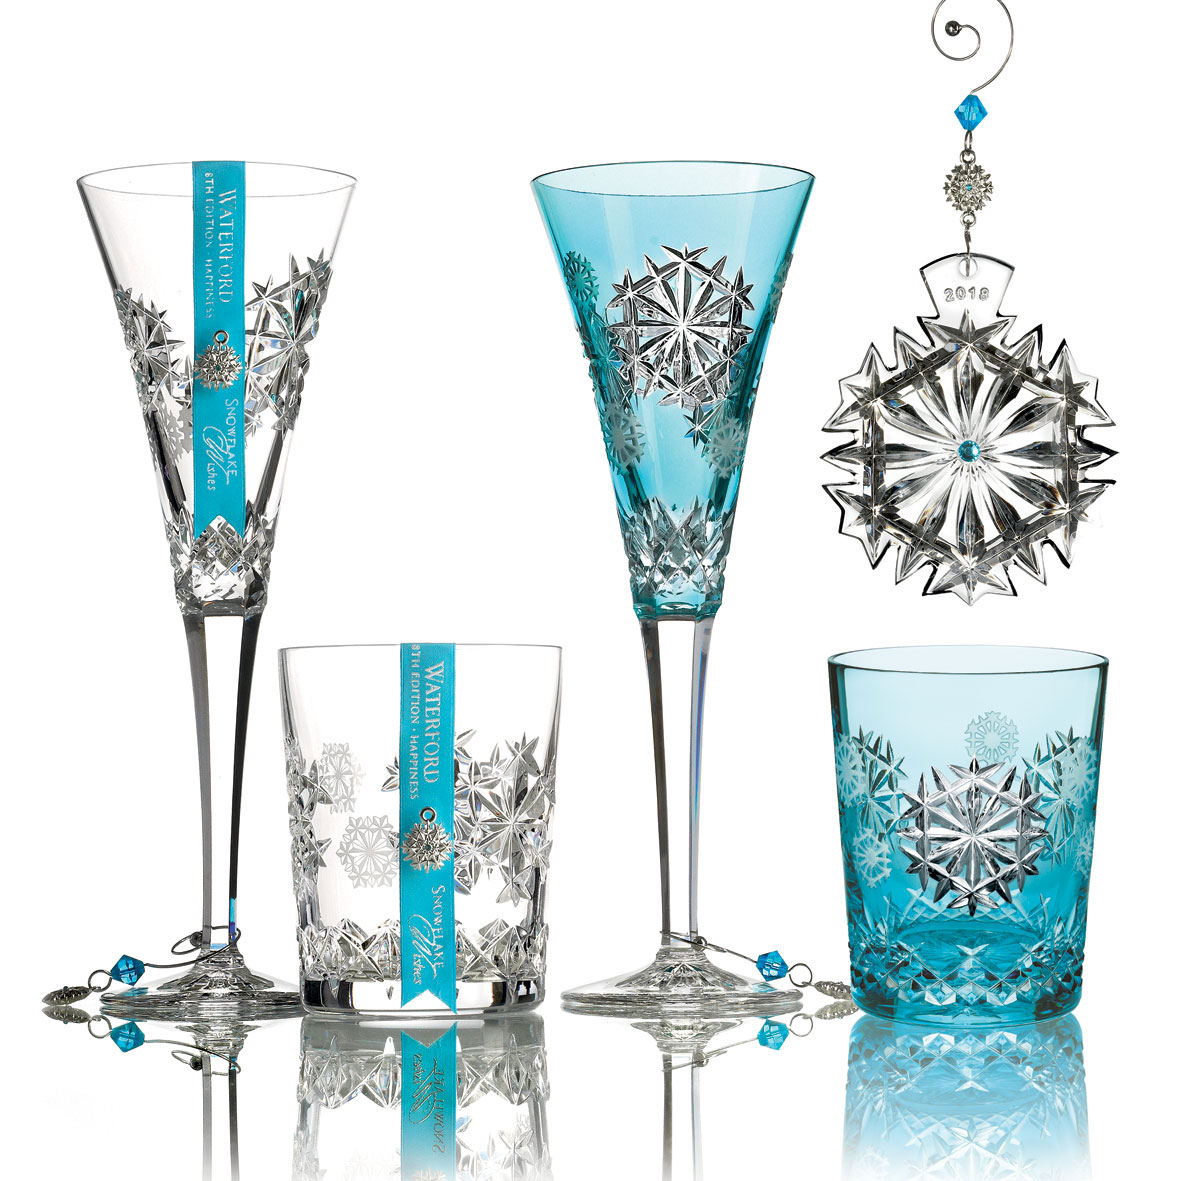 Waterford Crystal, Snowflake Wishes Happiness Aqua Crystal Flute, Single